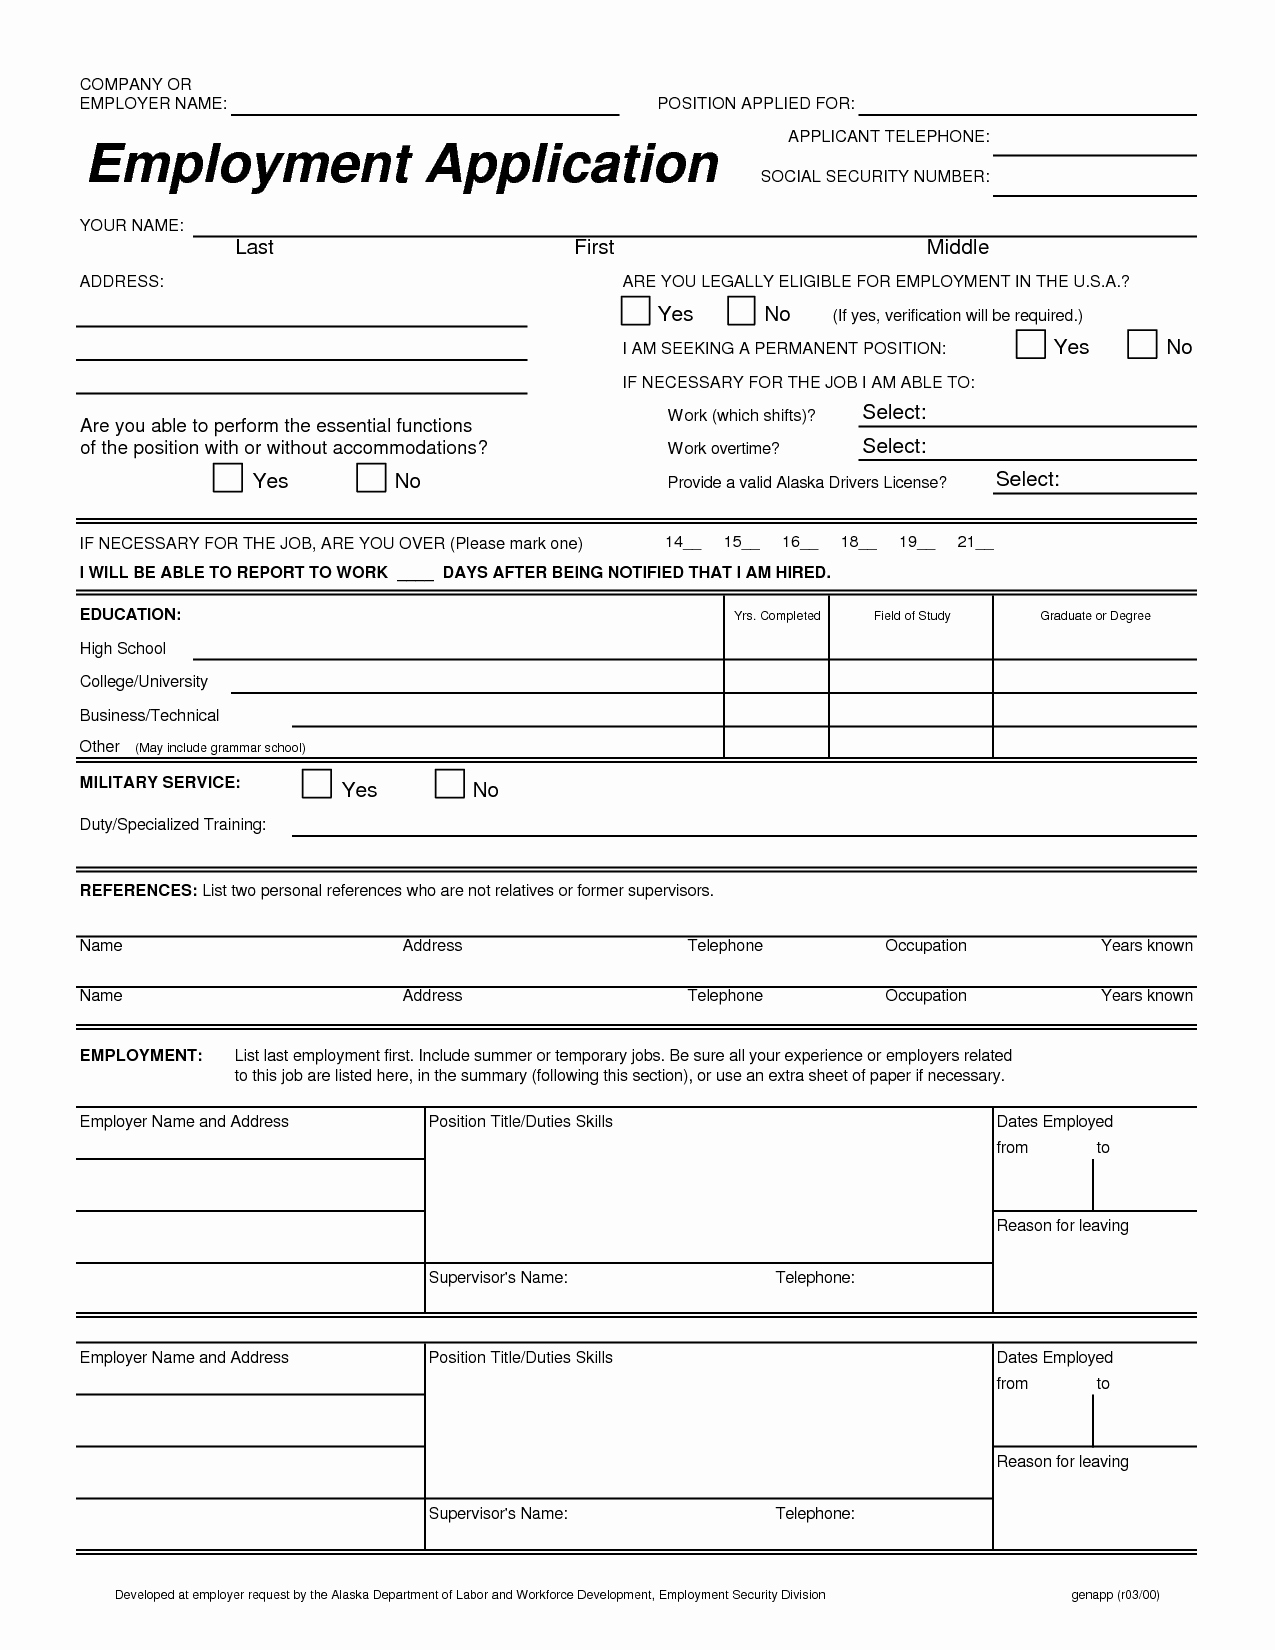 Physical Examination form Template Best Of Employment Application form